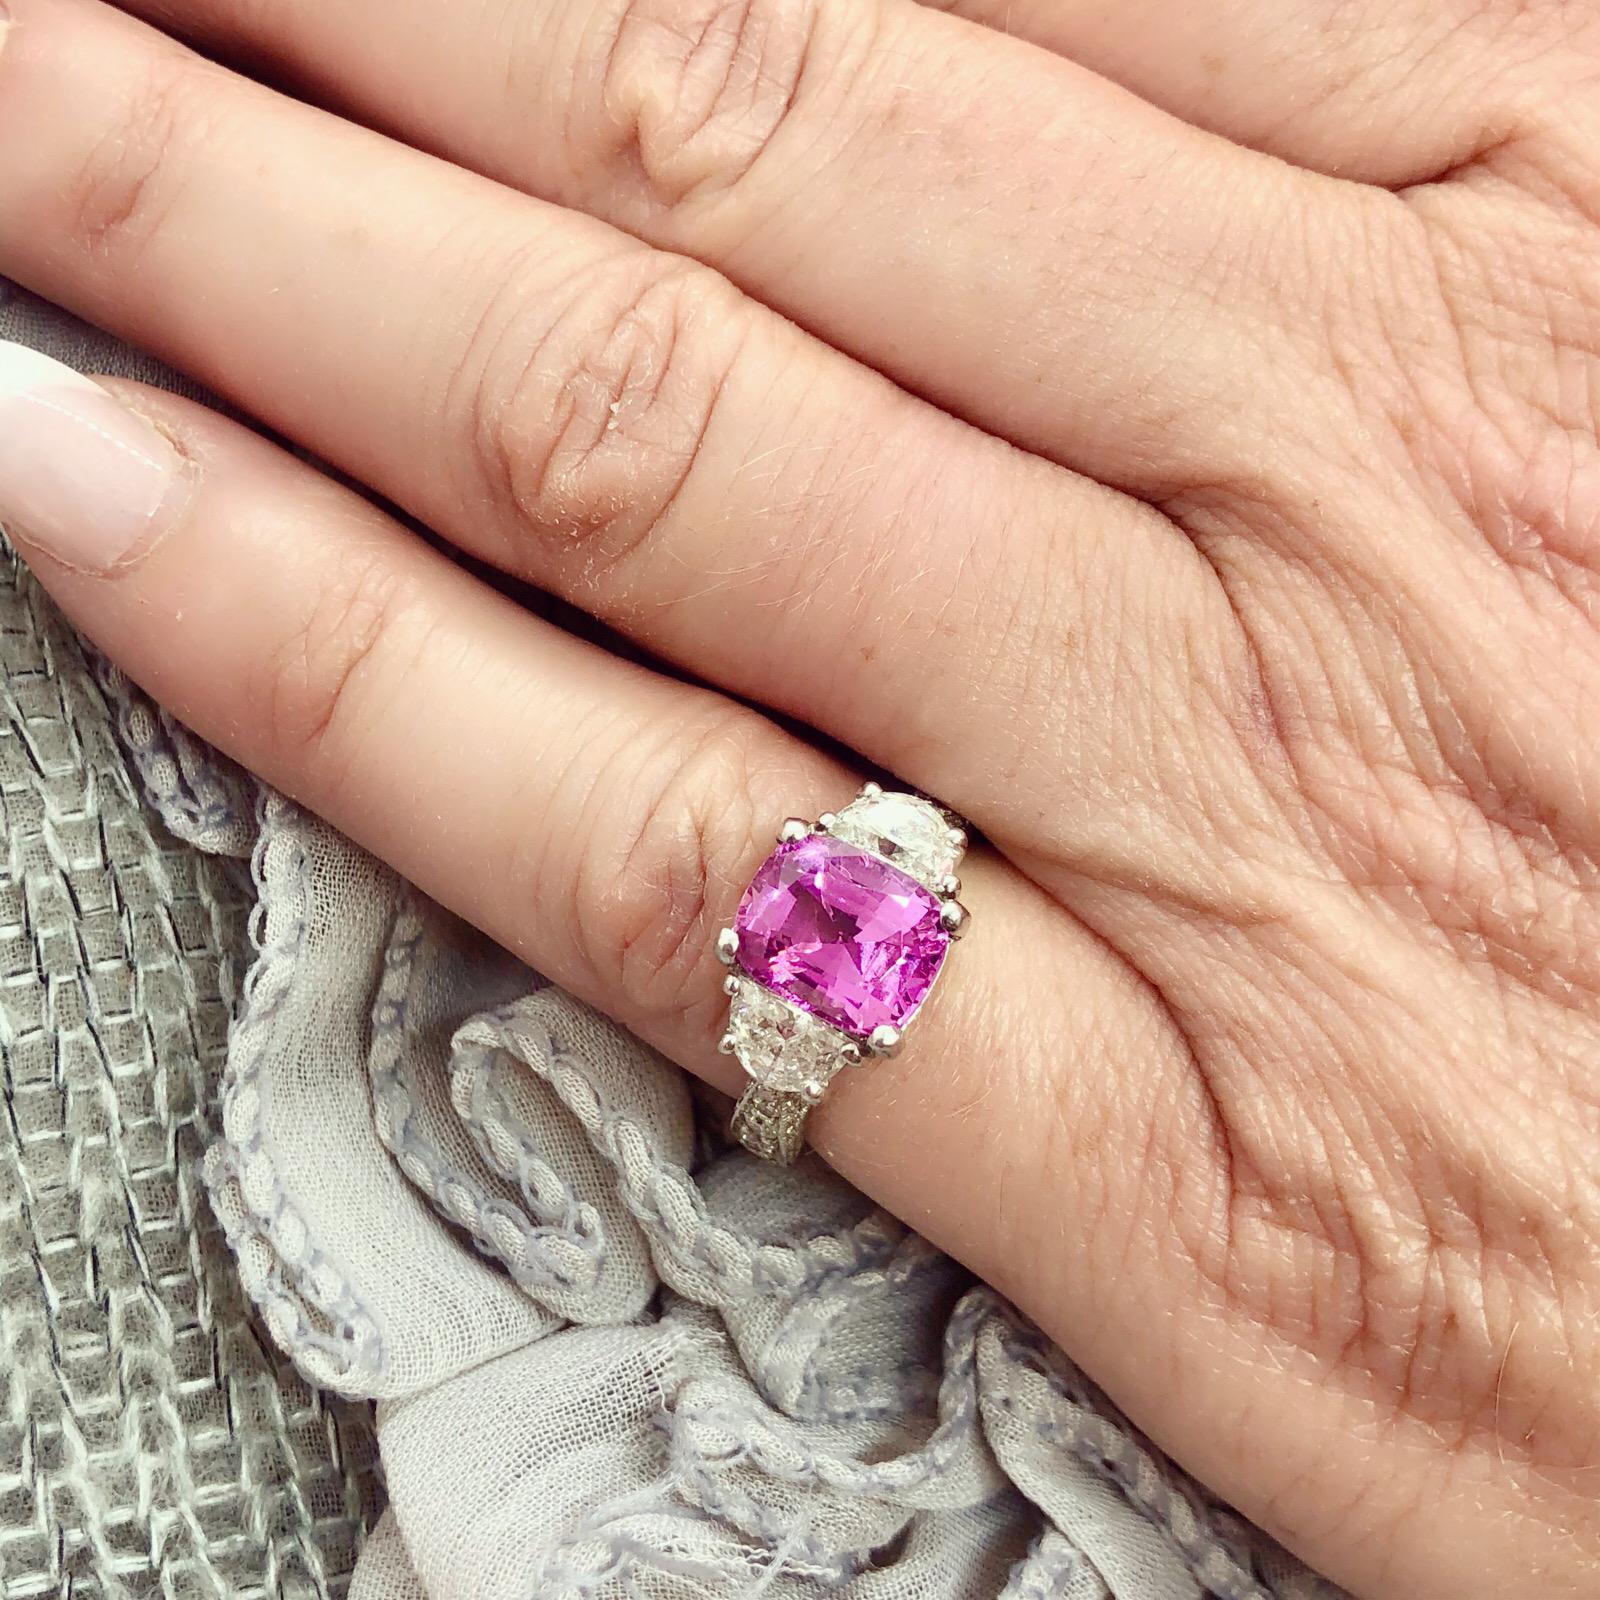 Eye-catching estate ring features one extraordinary 3.34ct rectangular cushion cut purplish pink sapphire with exceptional light return and saturation of color, and 52 half moon & round diamonds with a total approximate weight of 1.24cts in a